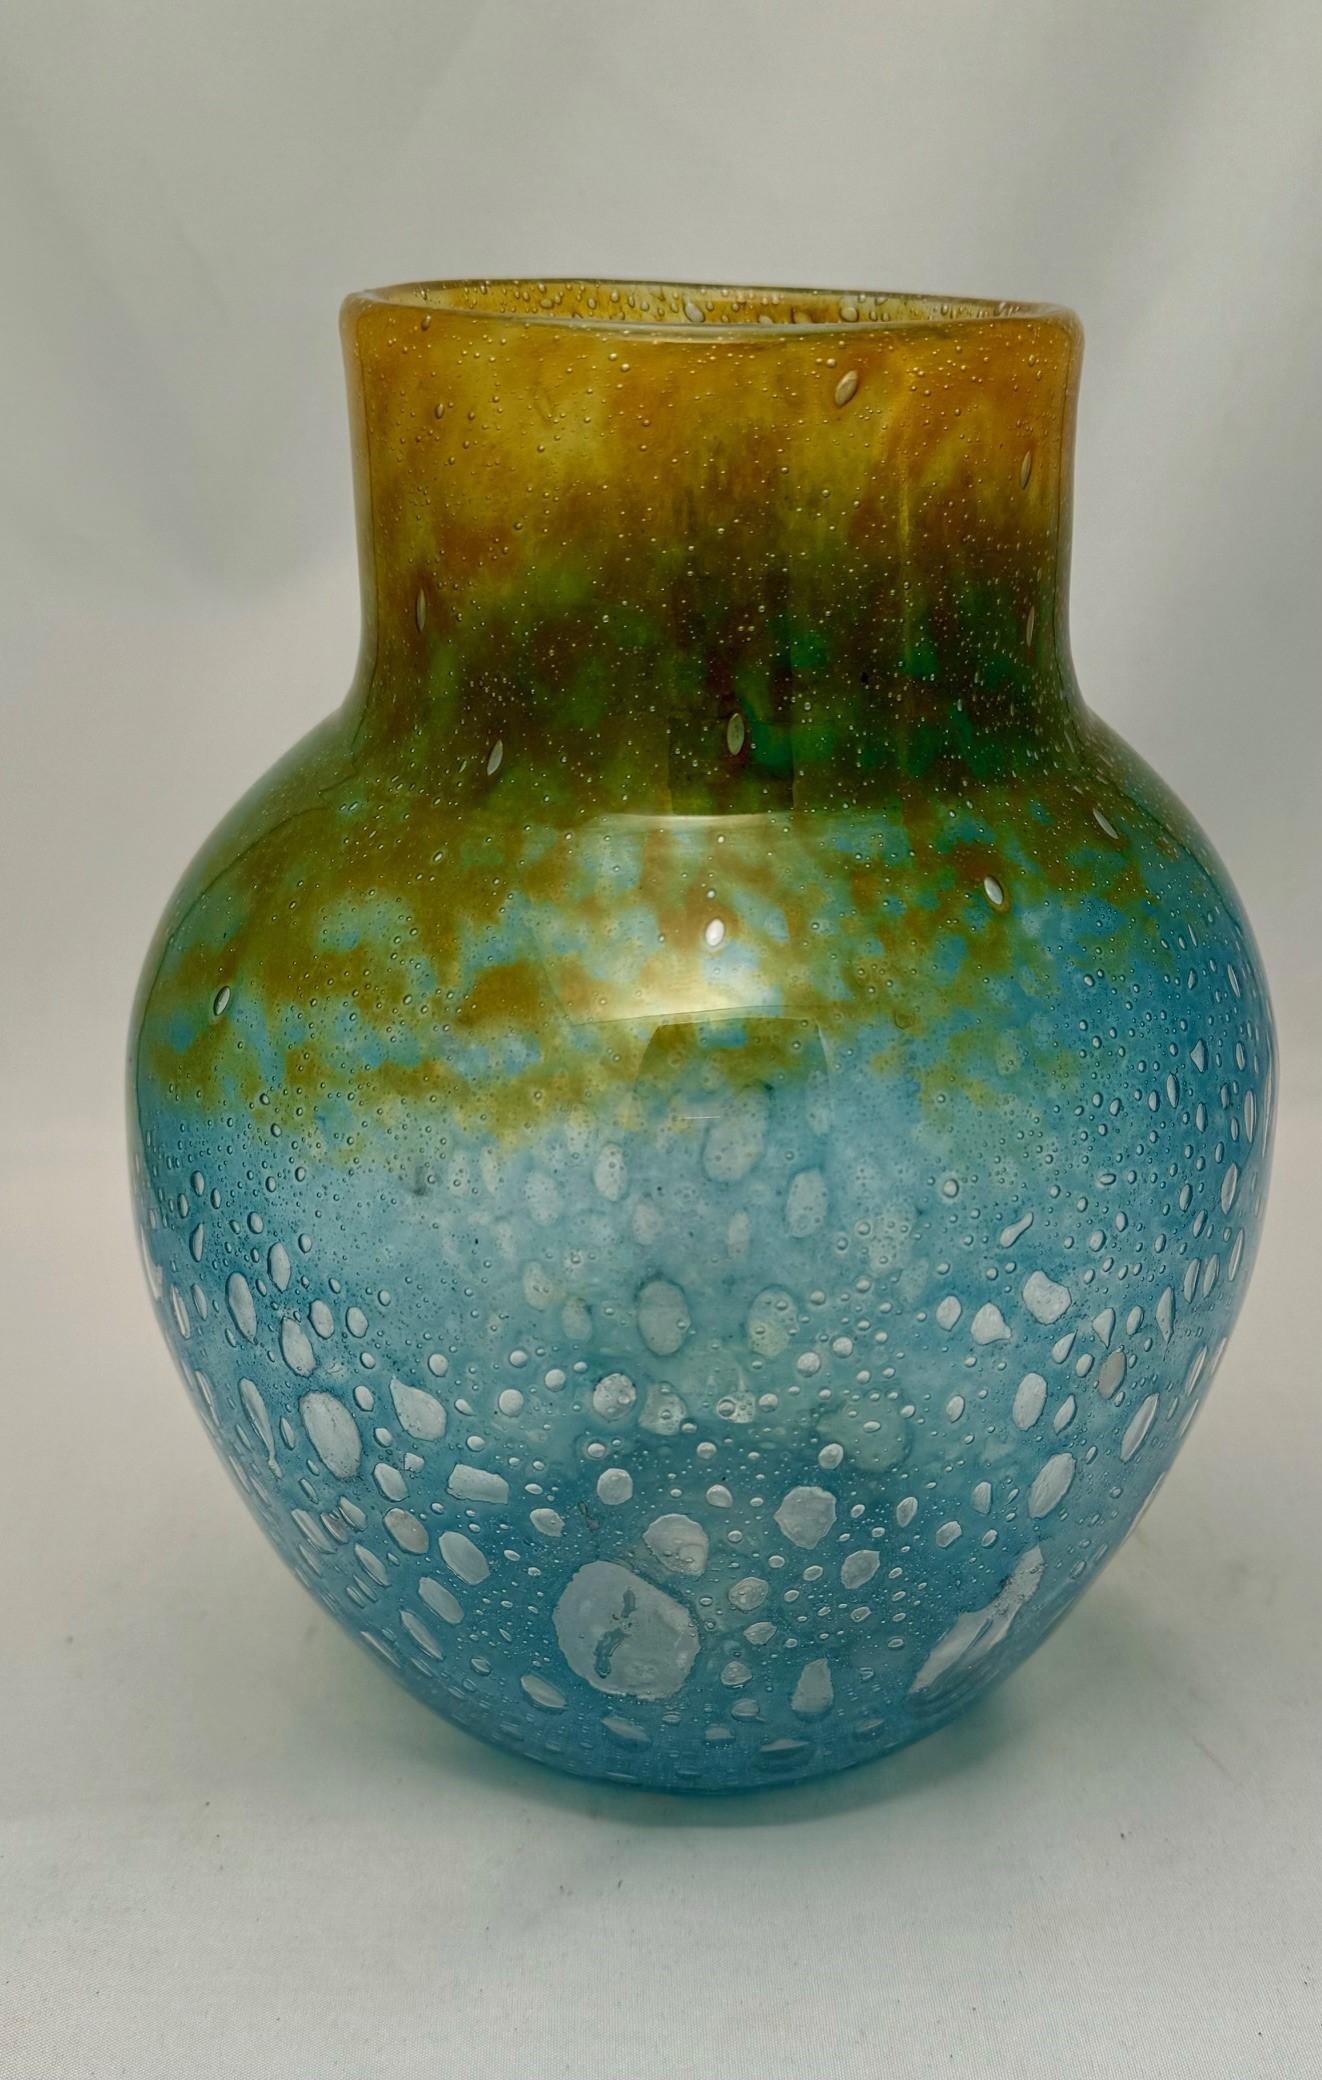 Monart Green Yellow Glass Vase In Good Condition For Sale In Montreal, QC